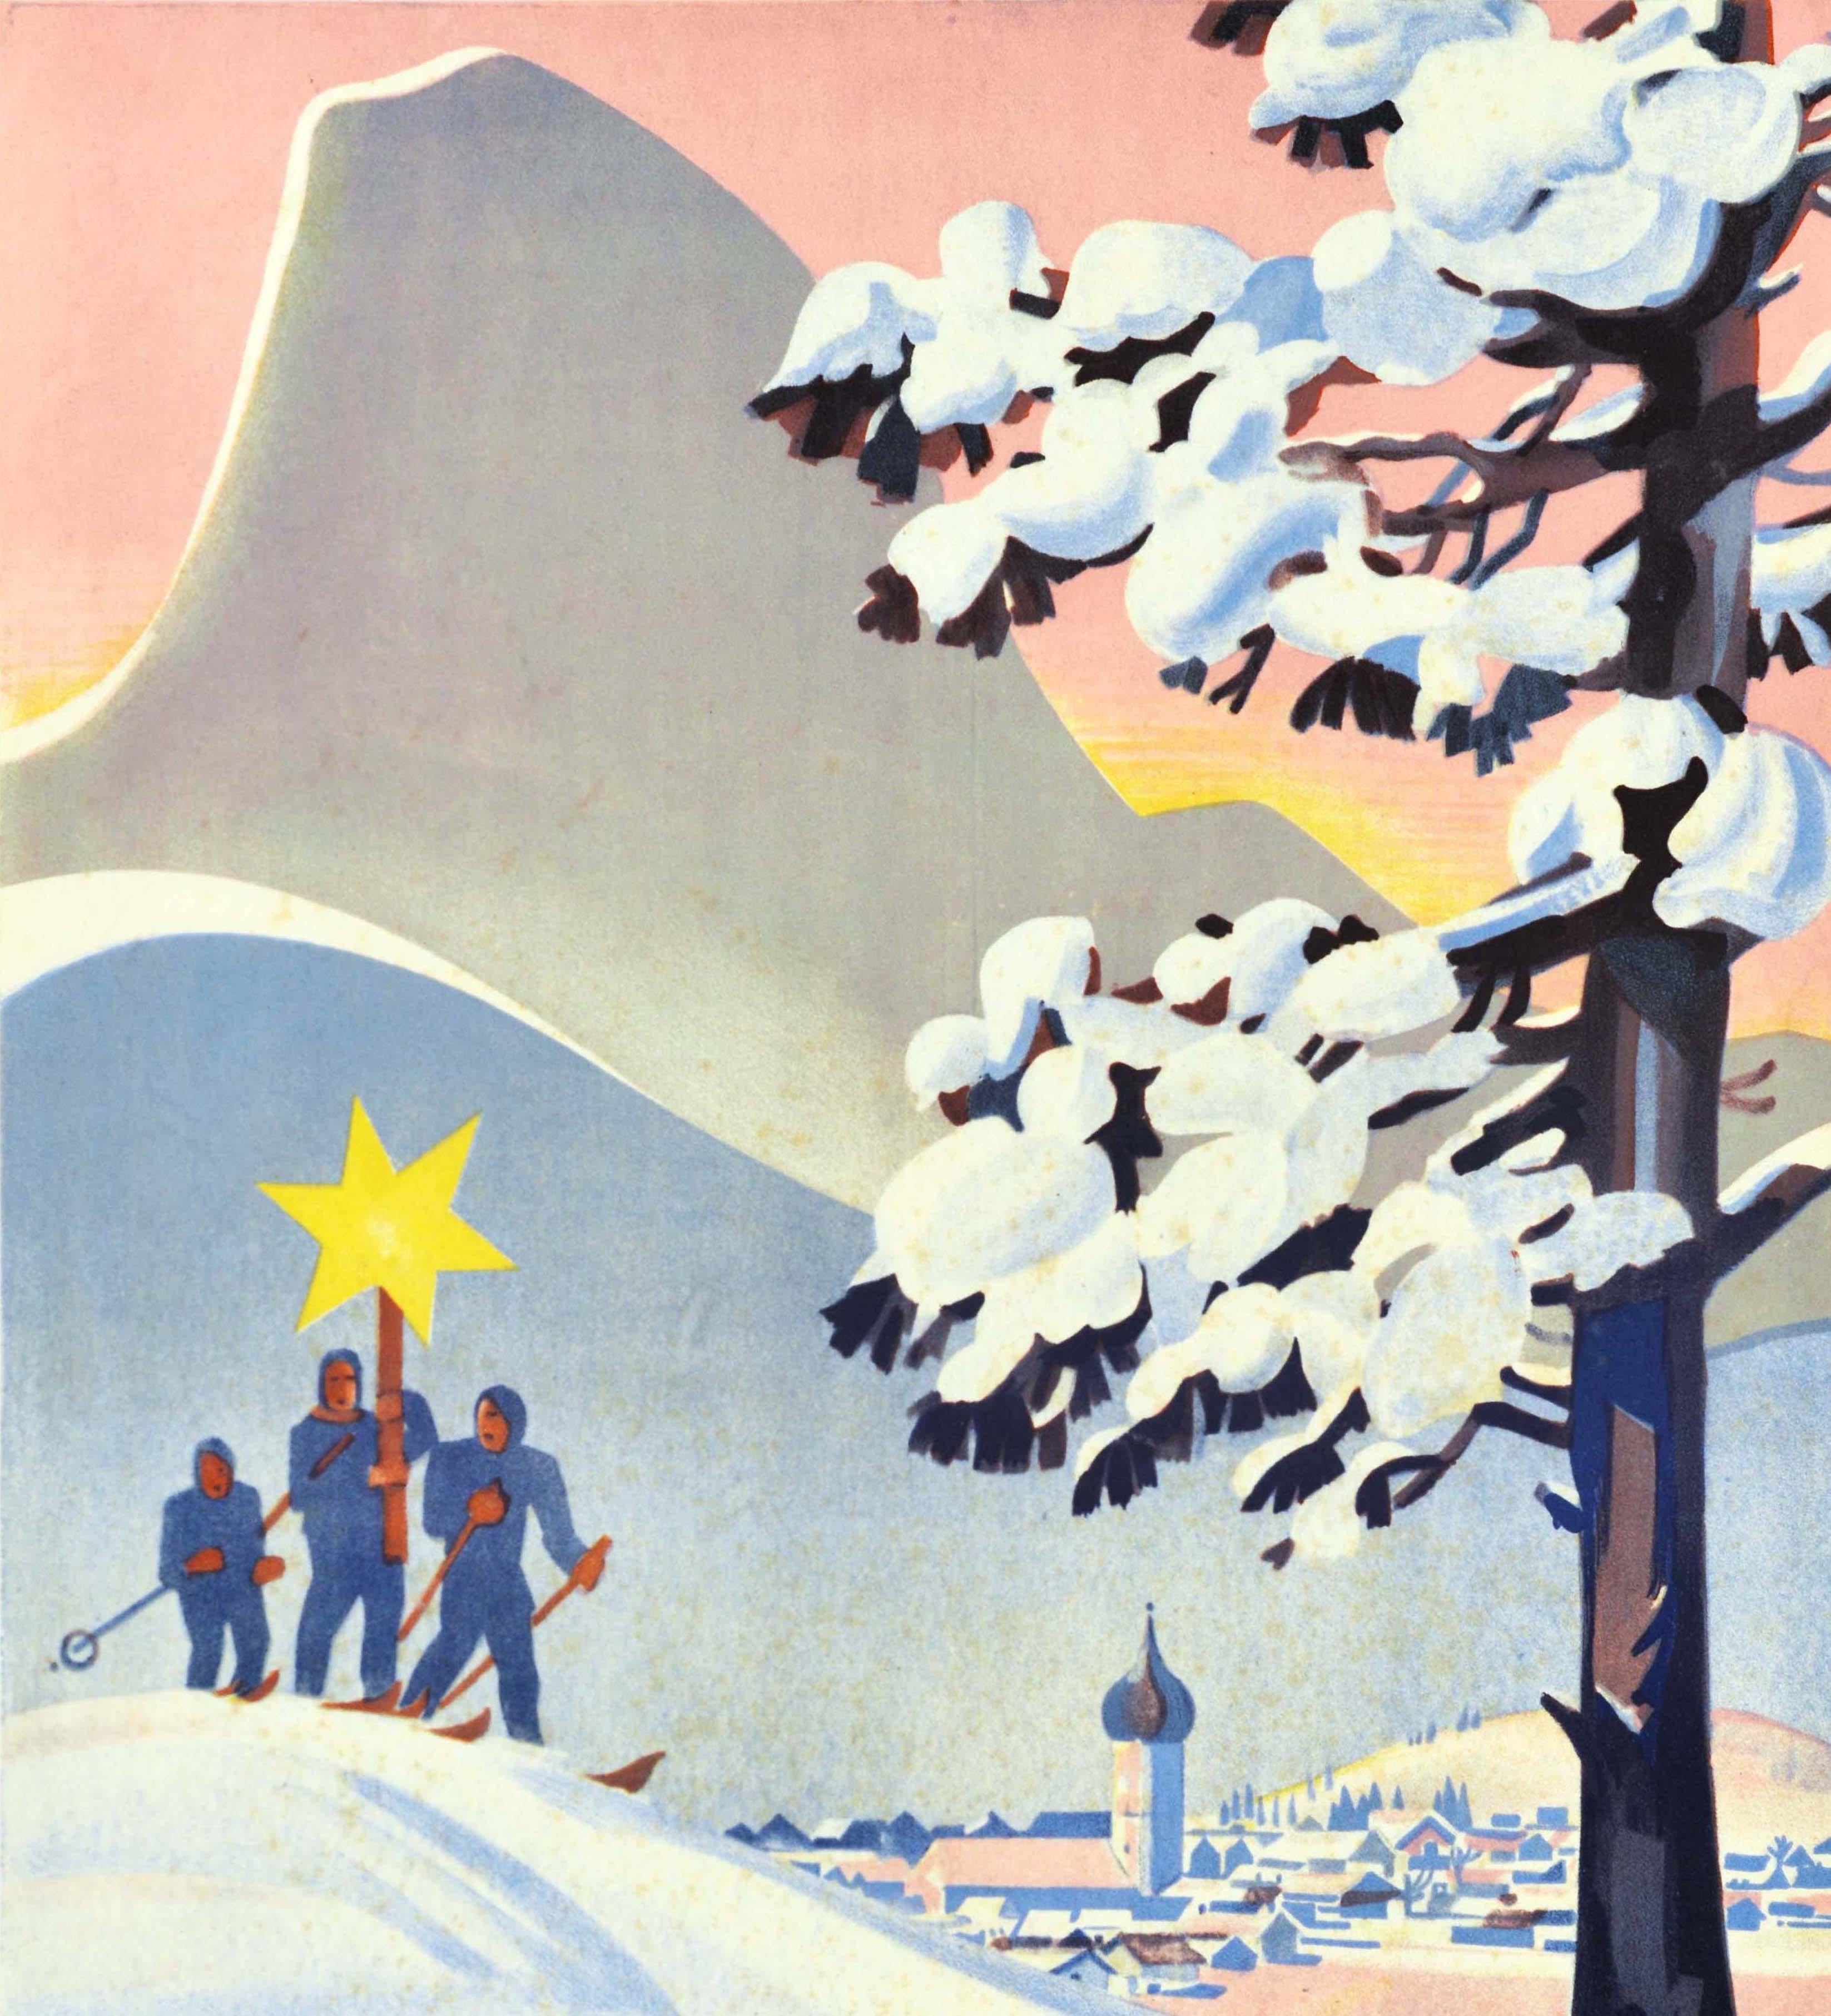 Original Vintage Winter Sport Travel Poster Oberammergau A Sunny Ski Paradise In Good Condition For Sale In London, GB